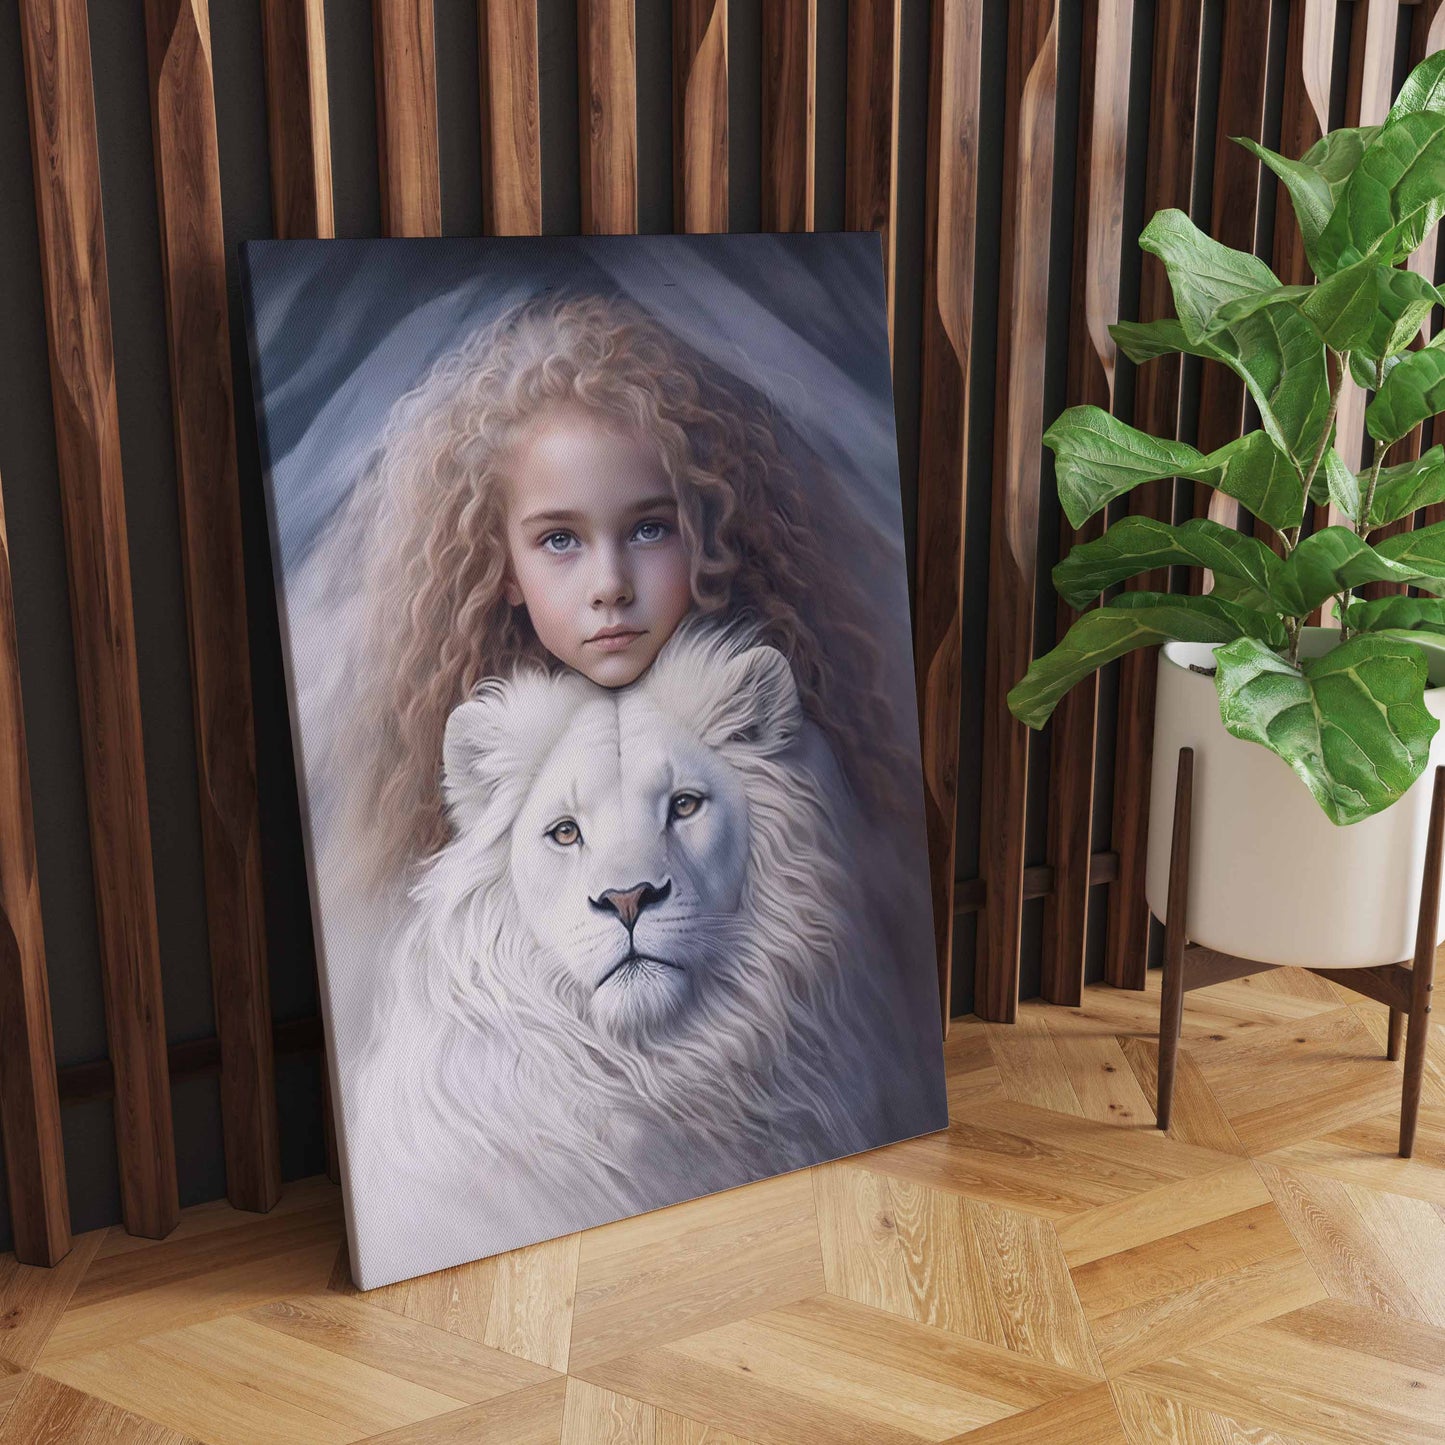 Guardians of the Innocence: A Small Girl's Unbreakable Bond with Her Loyal White Lion Companion - S10E03